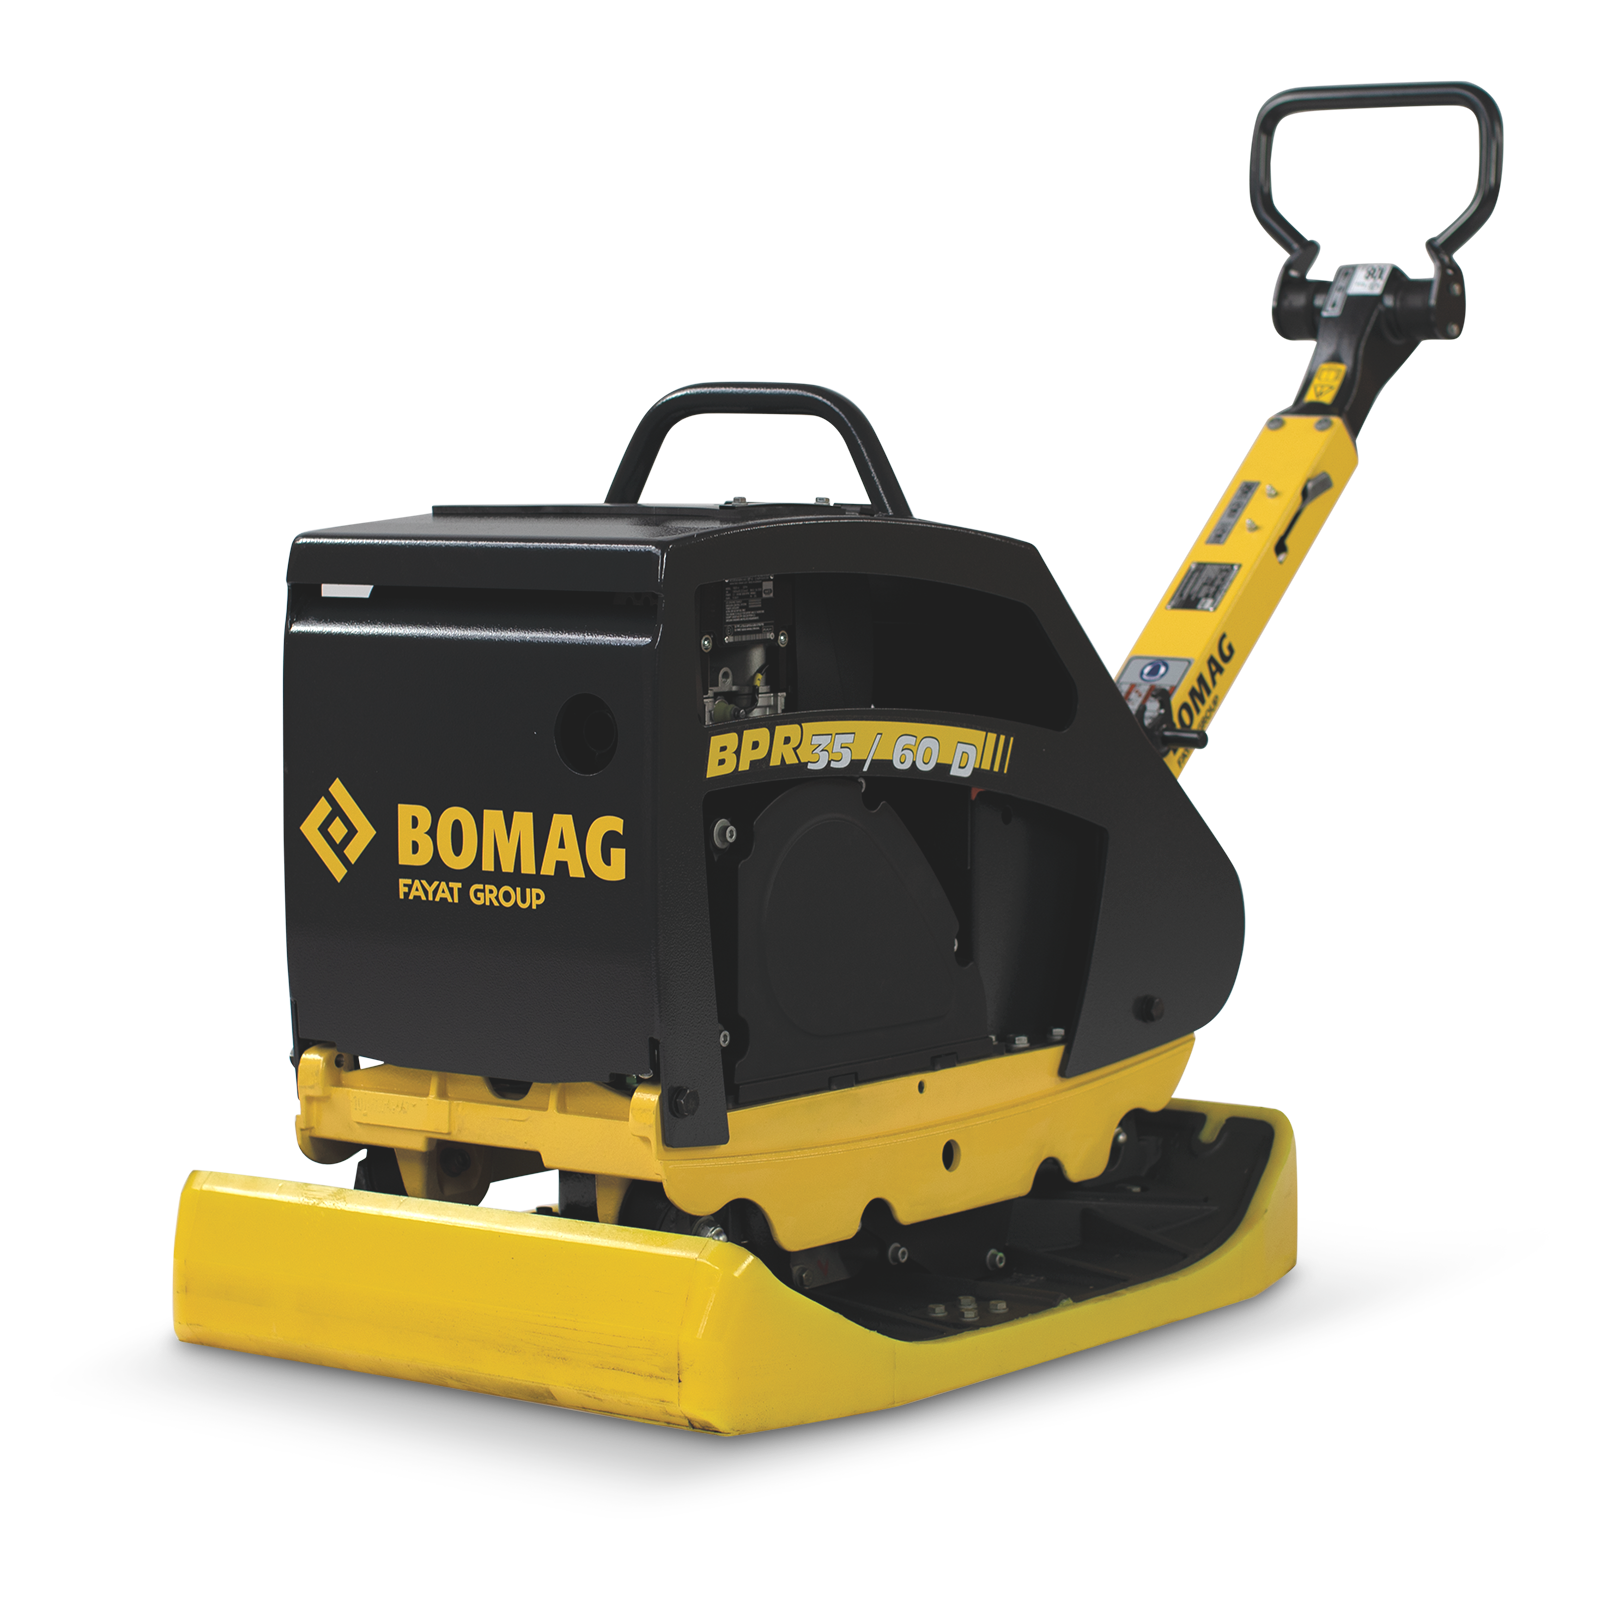 KKB Bomag Vibrating plate with stonegard 248 kg/35 kn BPR 35/60 D